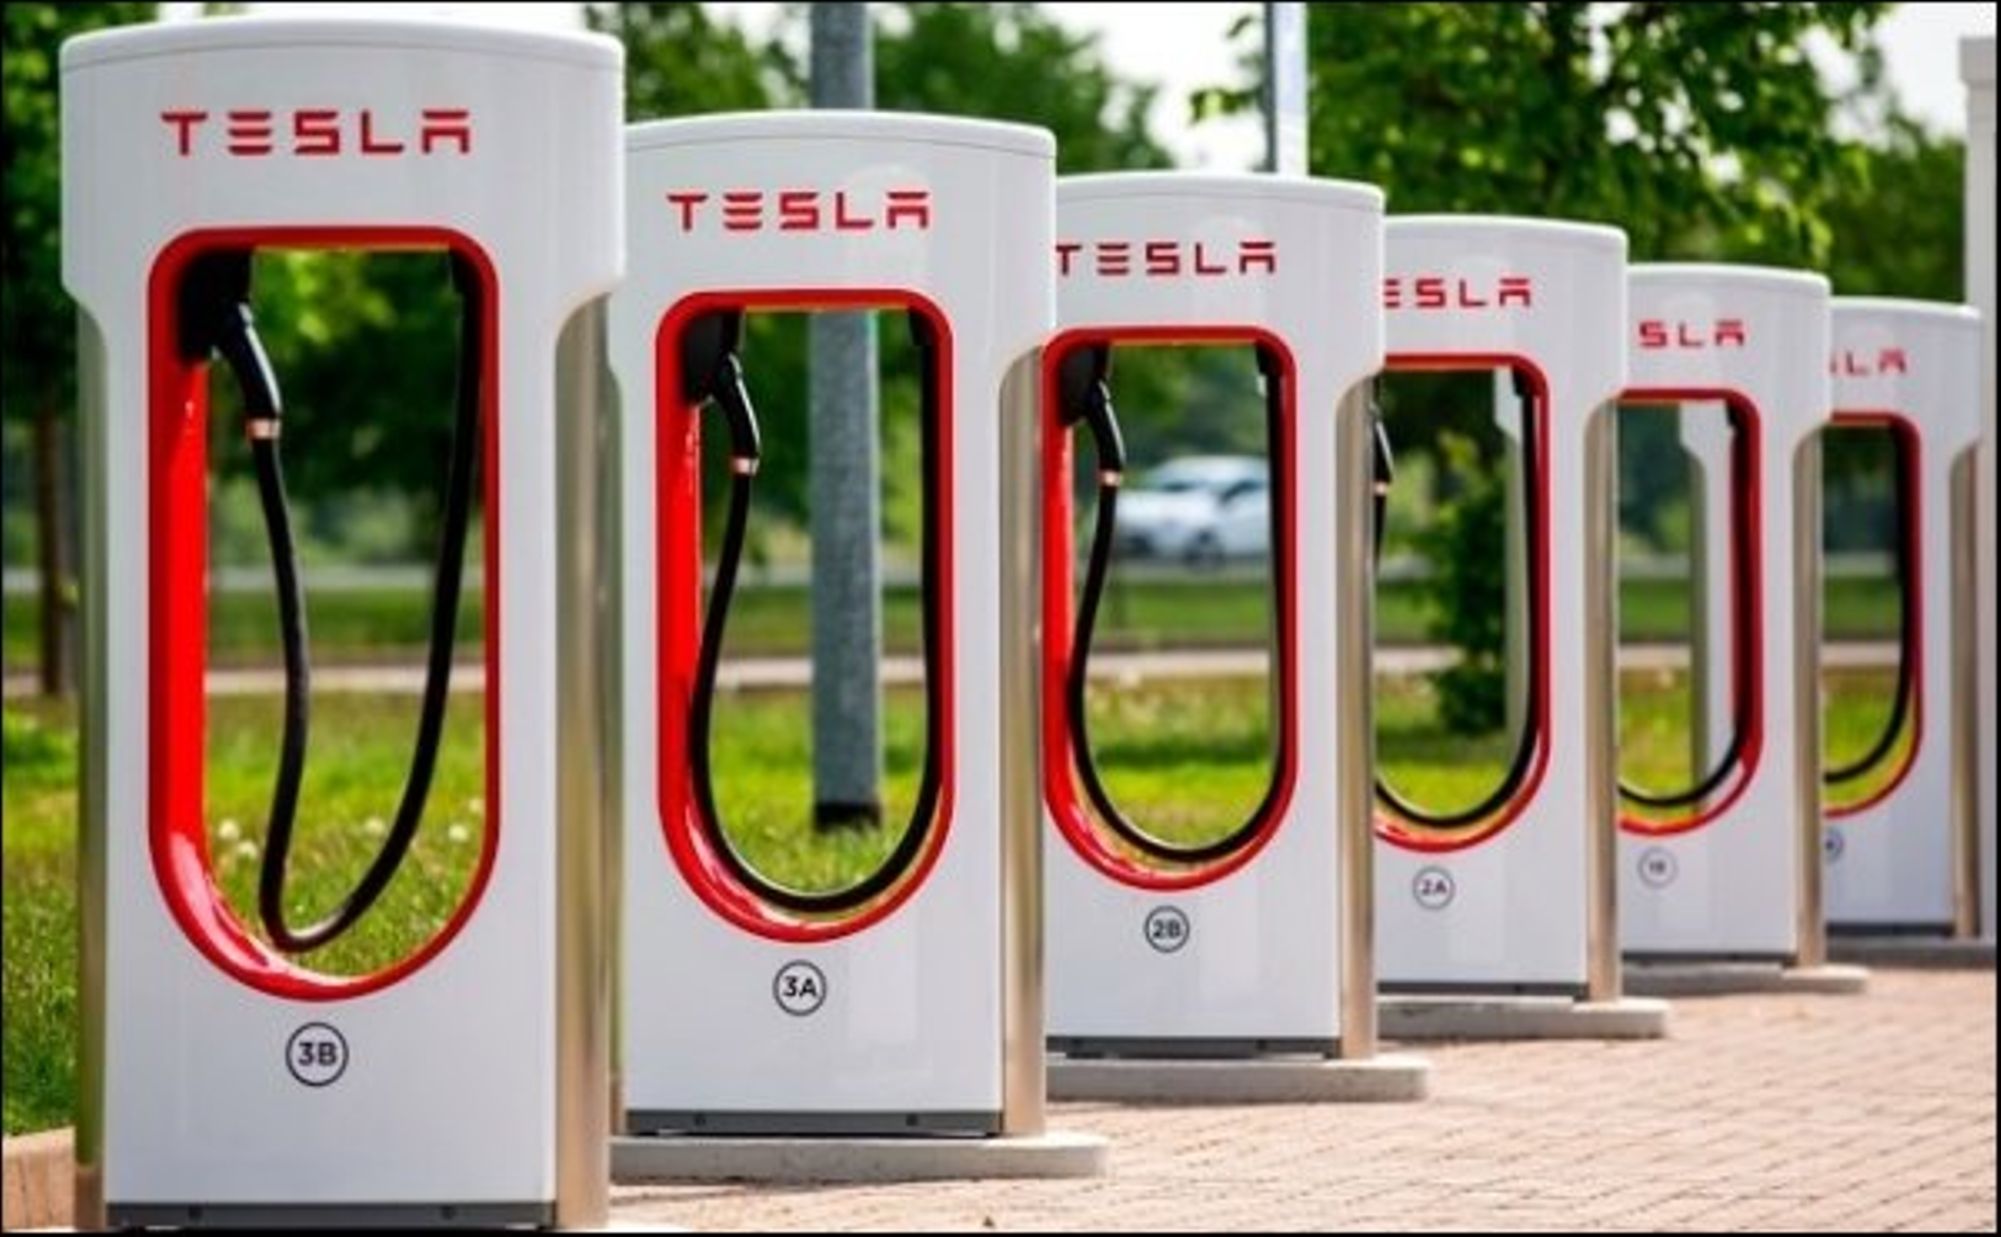 Tesla China To Increase 4000 Superchargers in 2020 for High Demanding Model 3